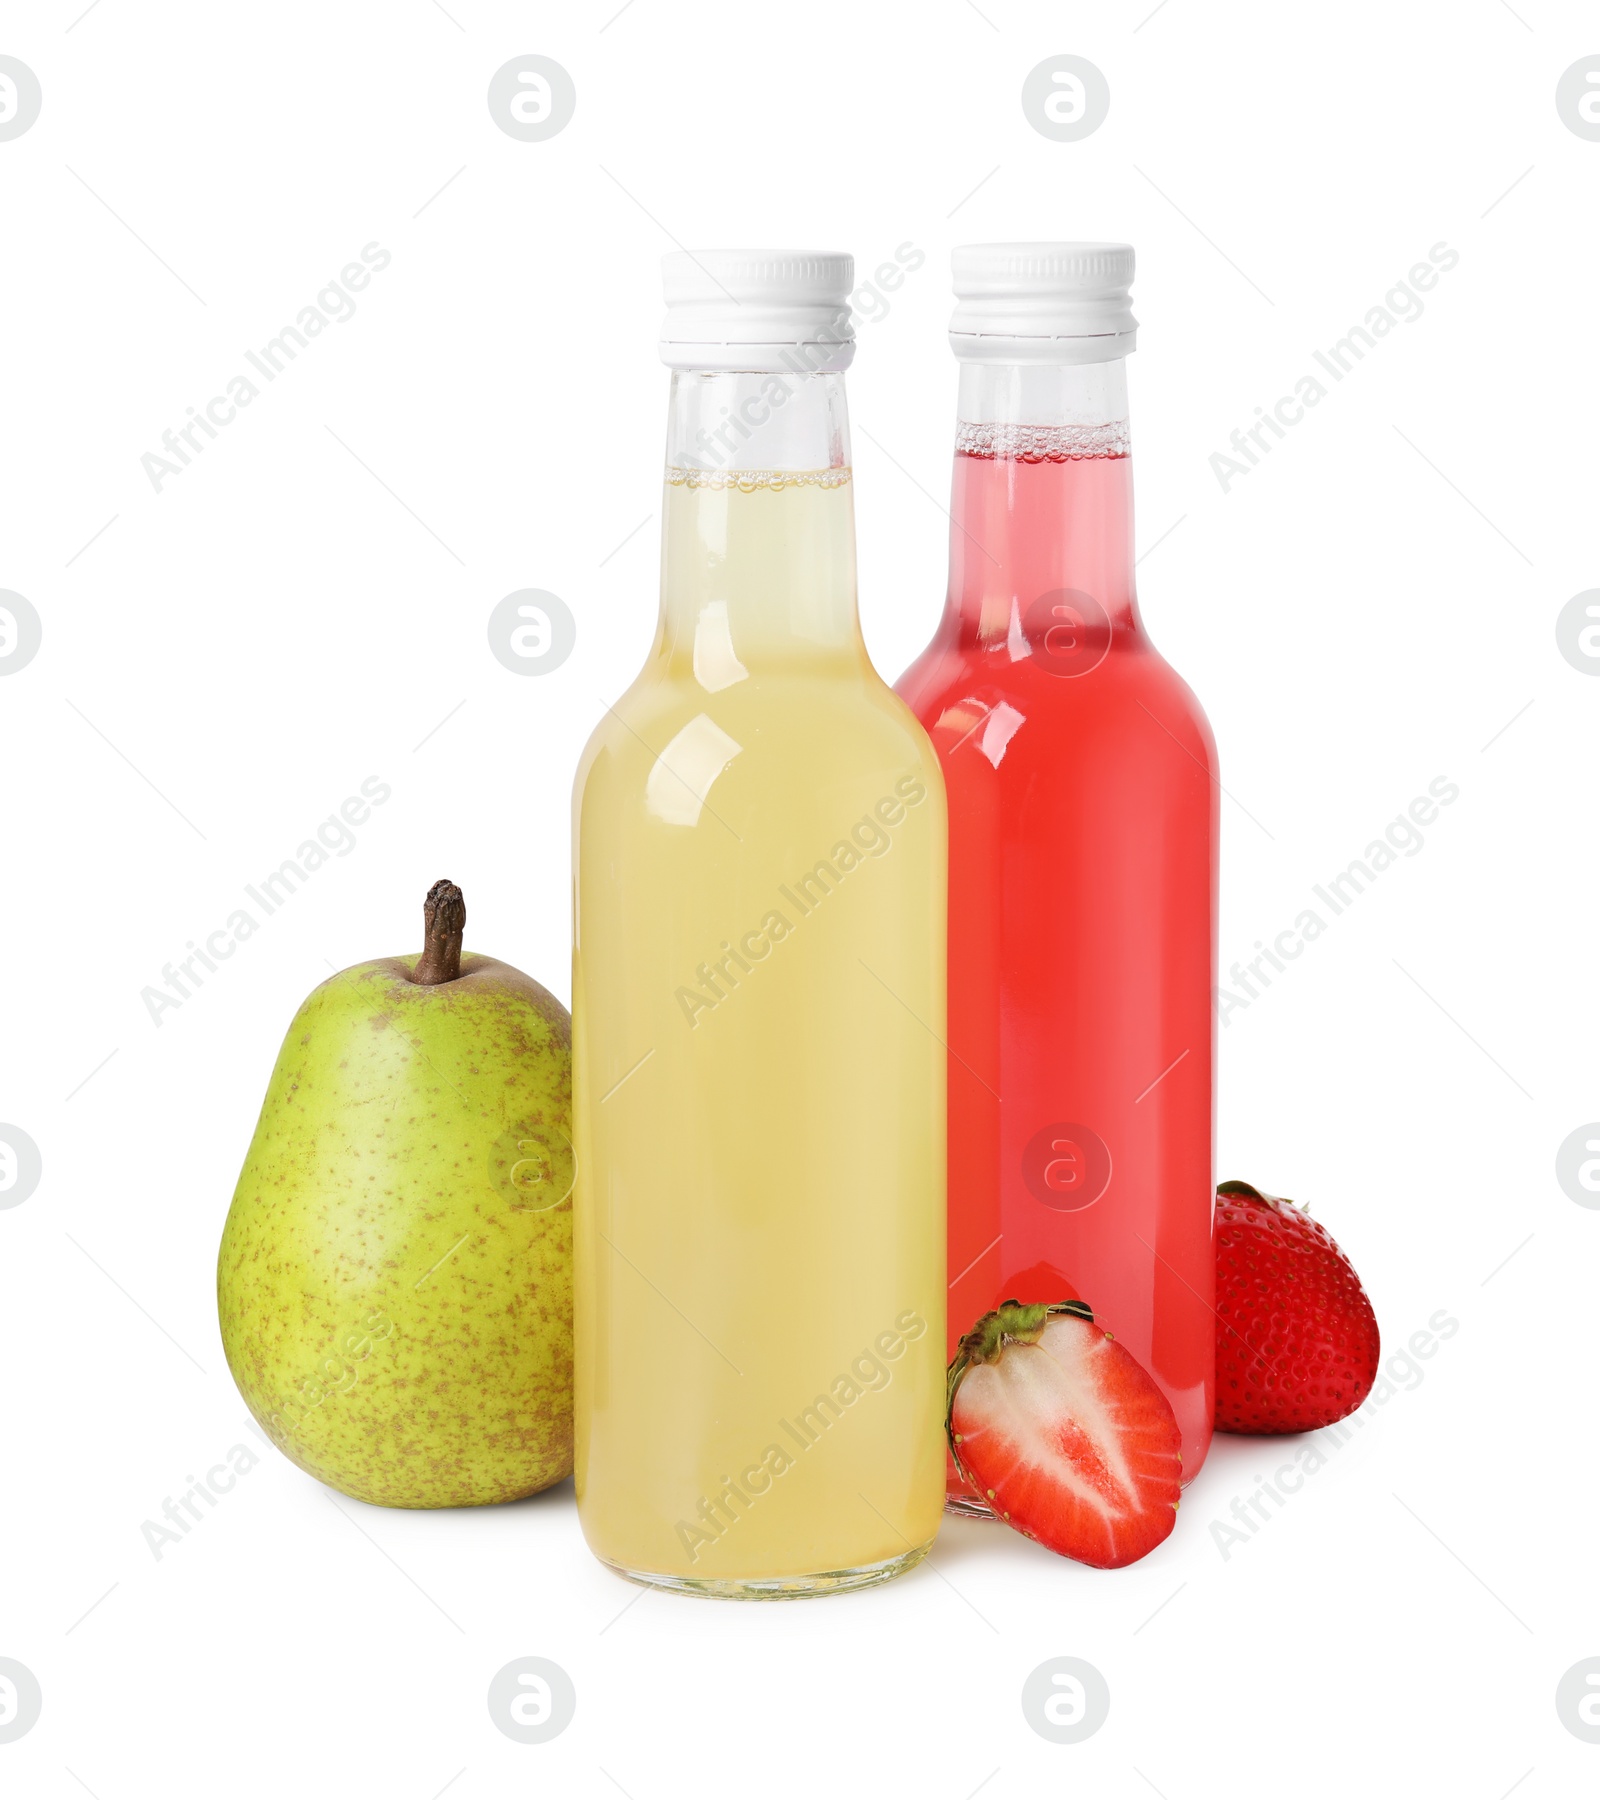 Photo of Delicious kombucha in glass bottles, pear and strawberries isolated on white